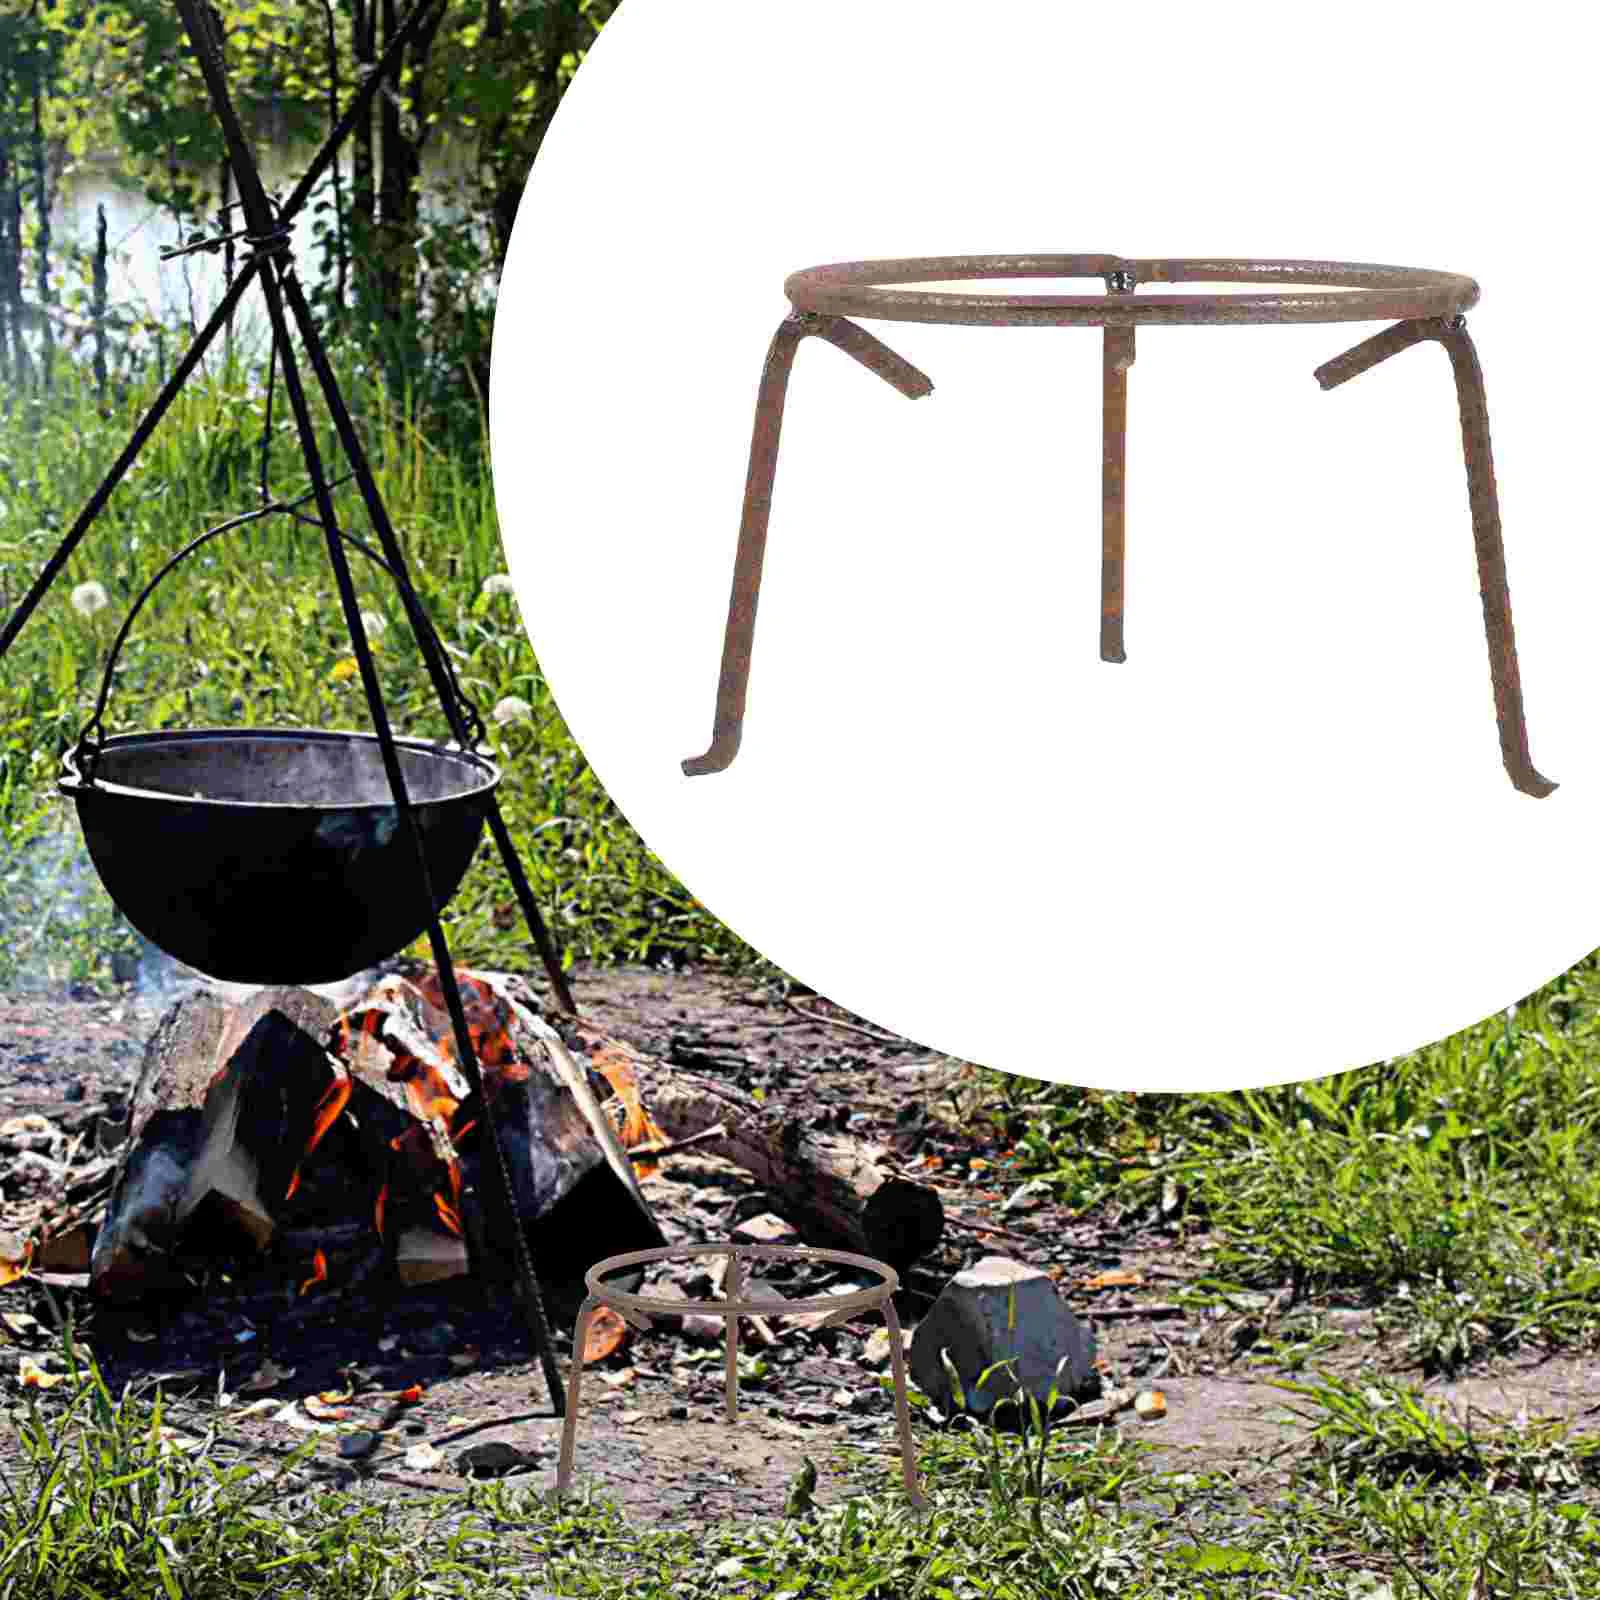 

Outdoor Barbecue Rack Camping Pot Holder Countertop Wok Rack Delicate Wok Holder Pot Accessory Multi-function Pan Rack for Wok